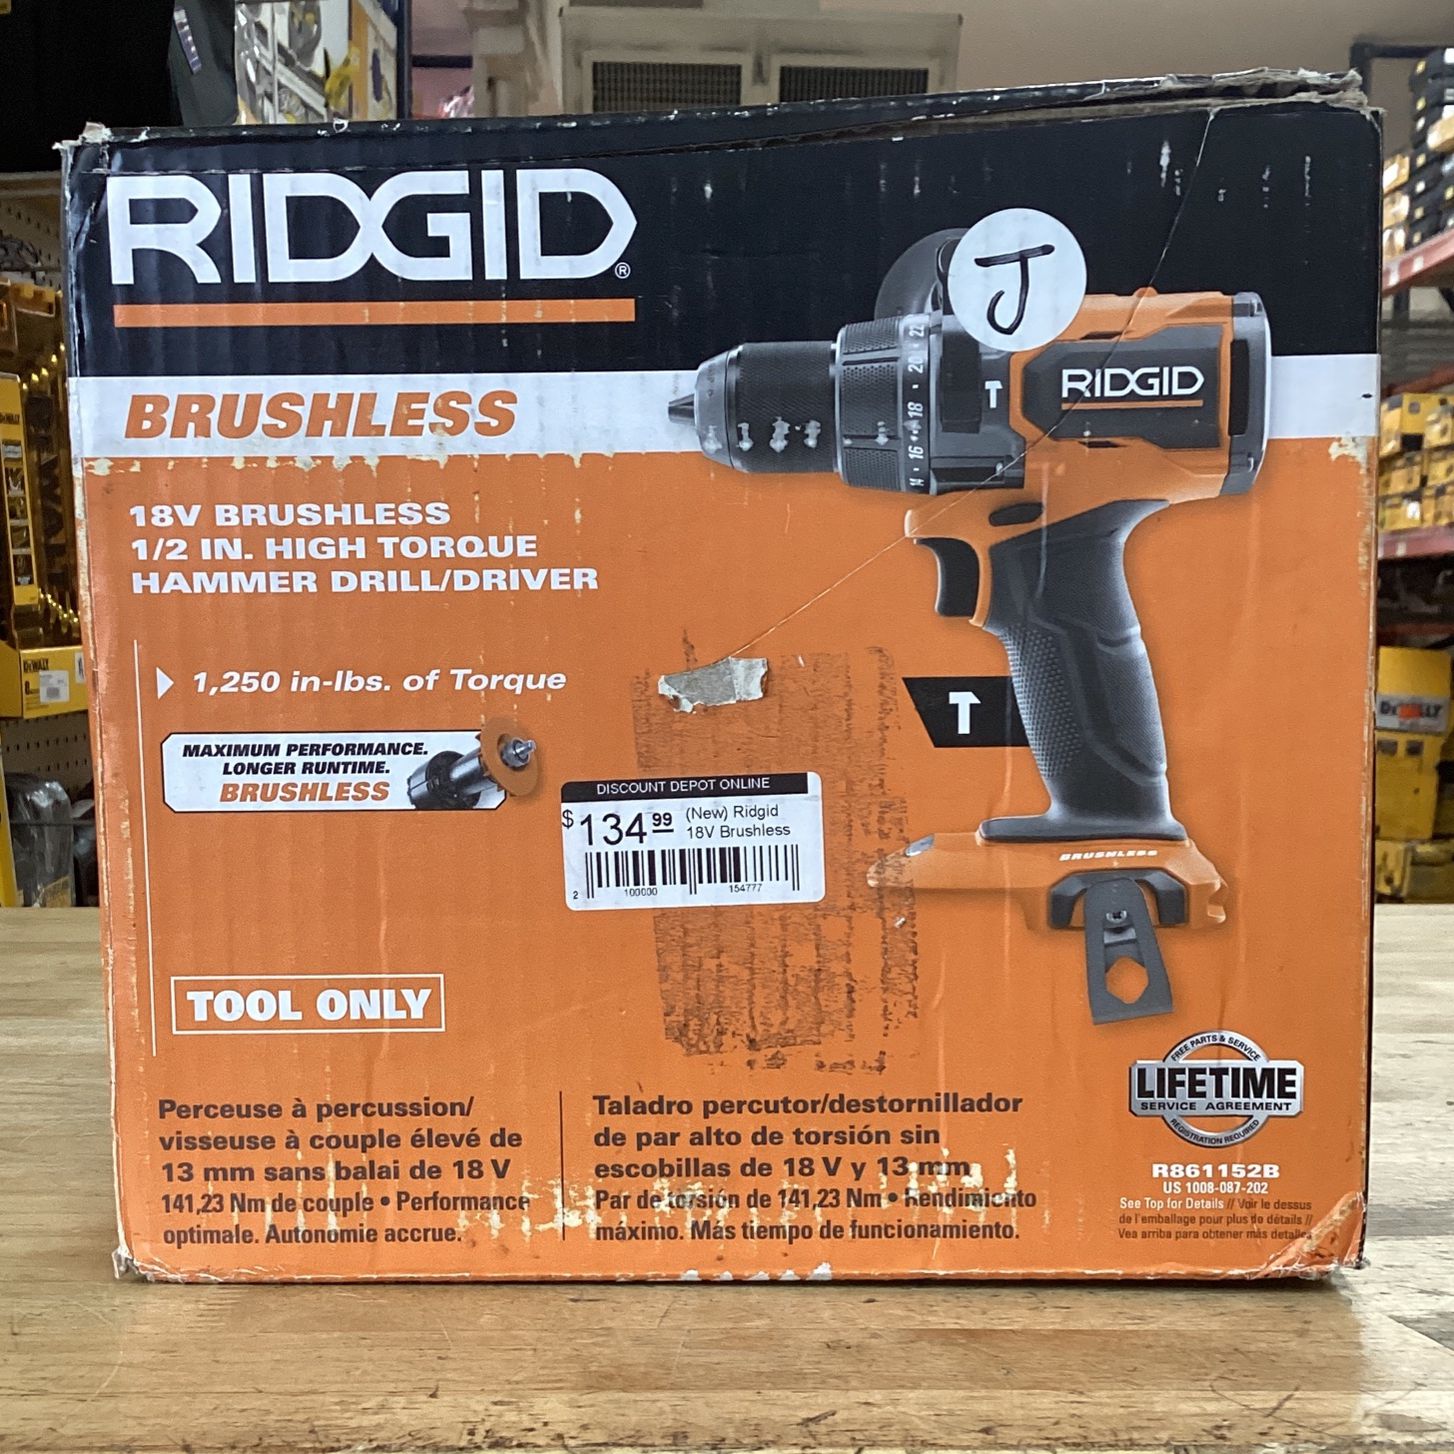 (New) Ridgid 18V Brushless Cordless 1/2 in. High Torque Hammer Drill/Driver (Tool Only) On Sale!